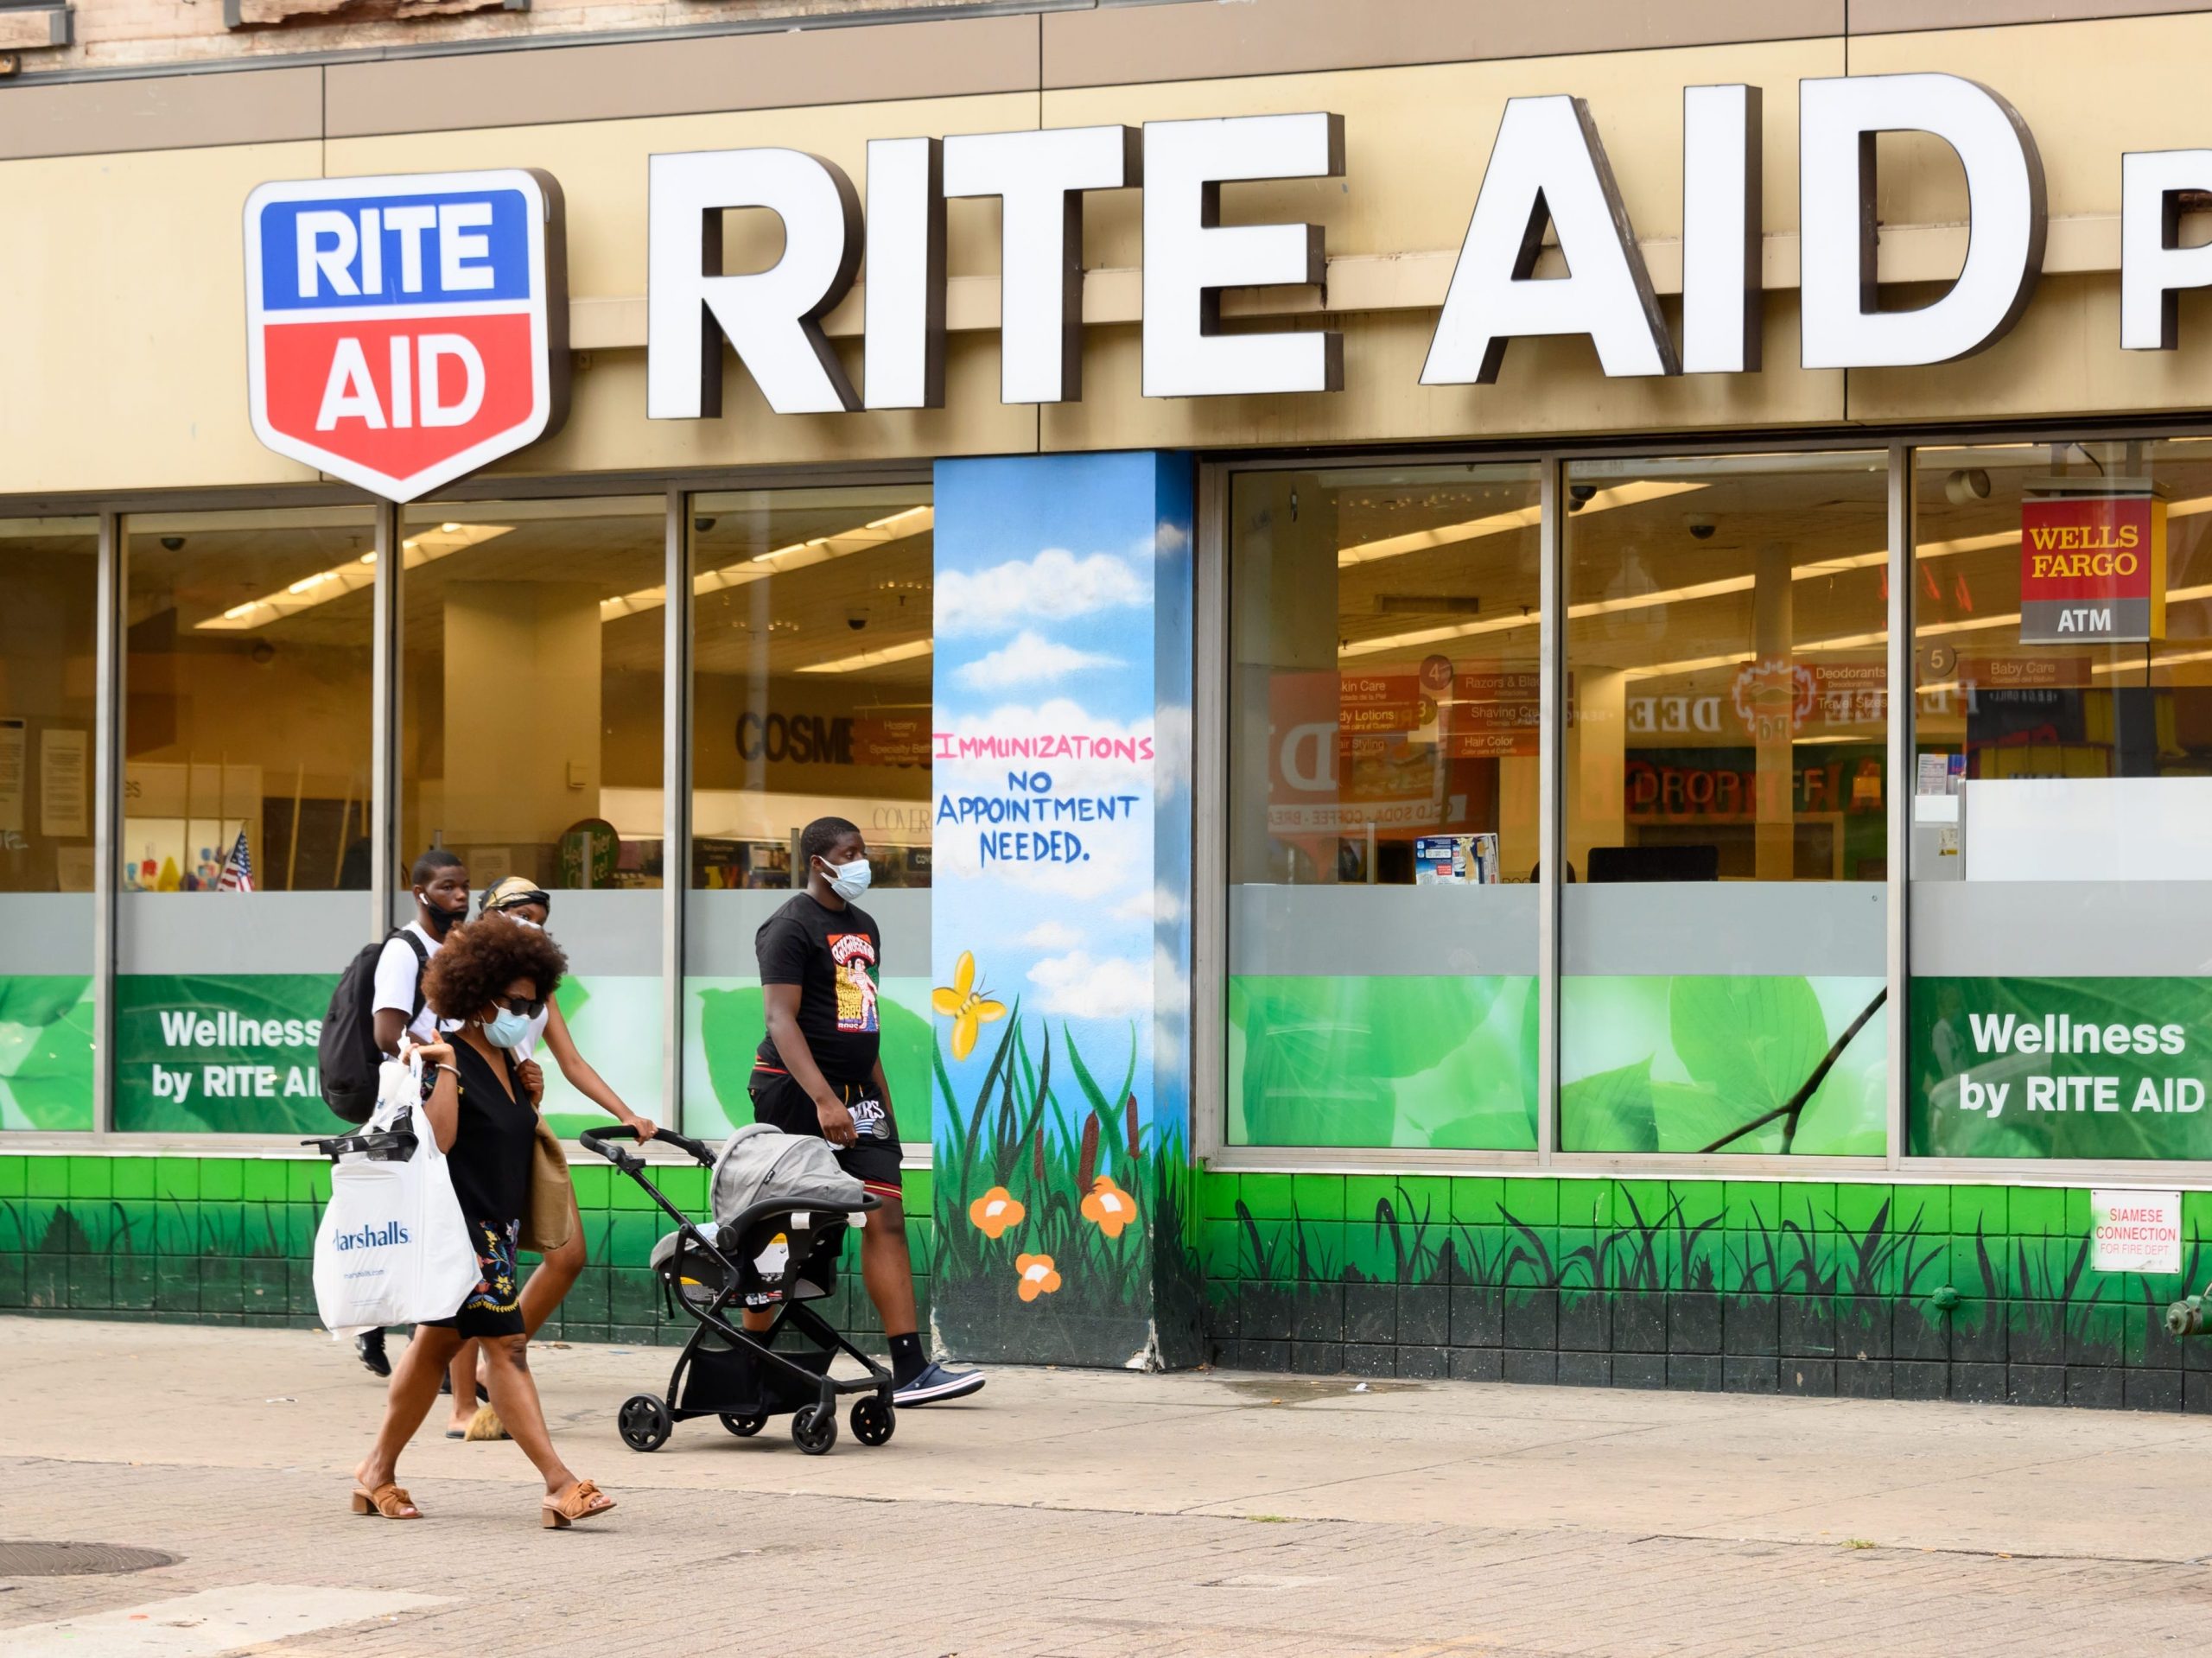 People wear protective face masks outside Rite Aid in Harlem